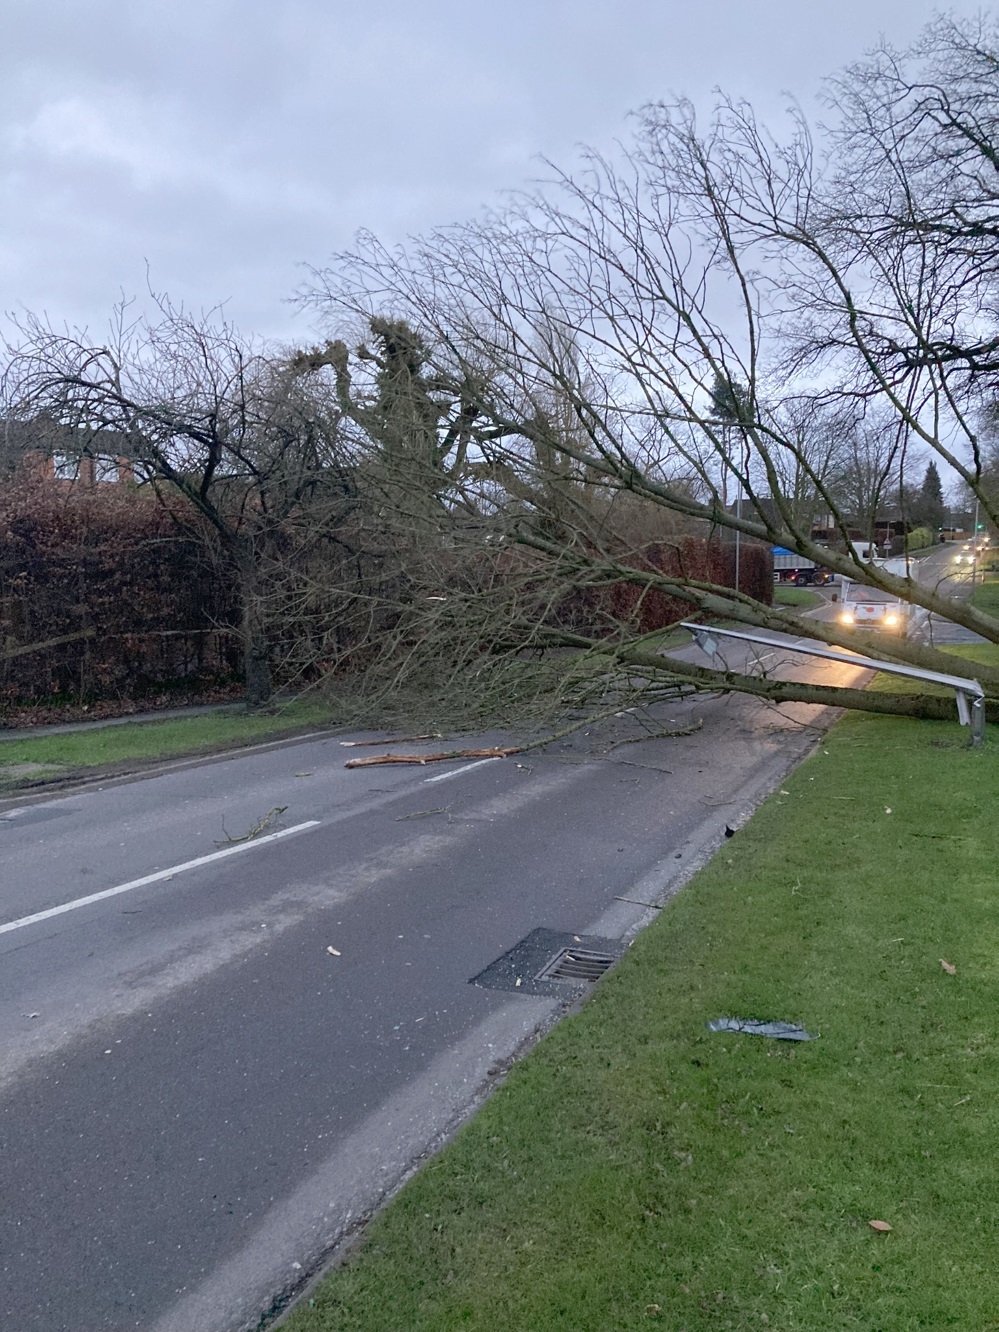 A fallen tree blocks a main route to the motorway